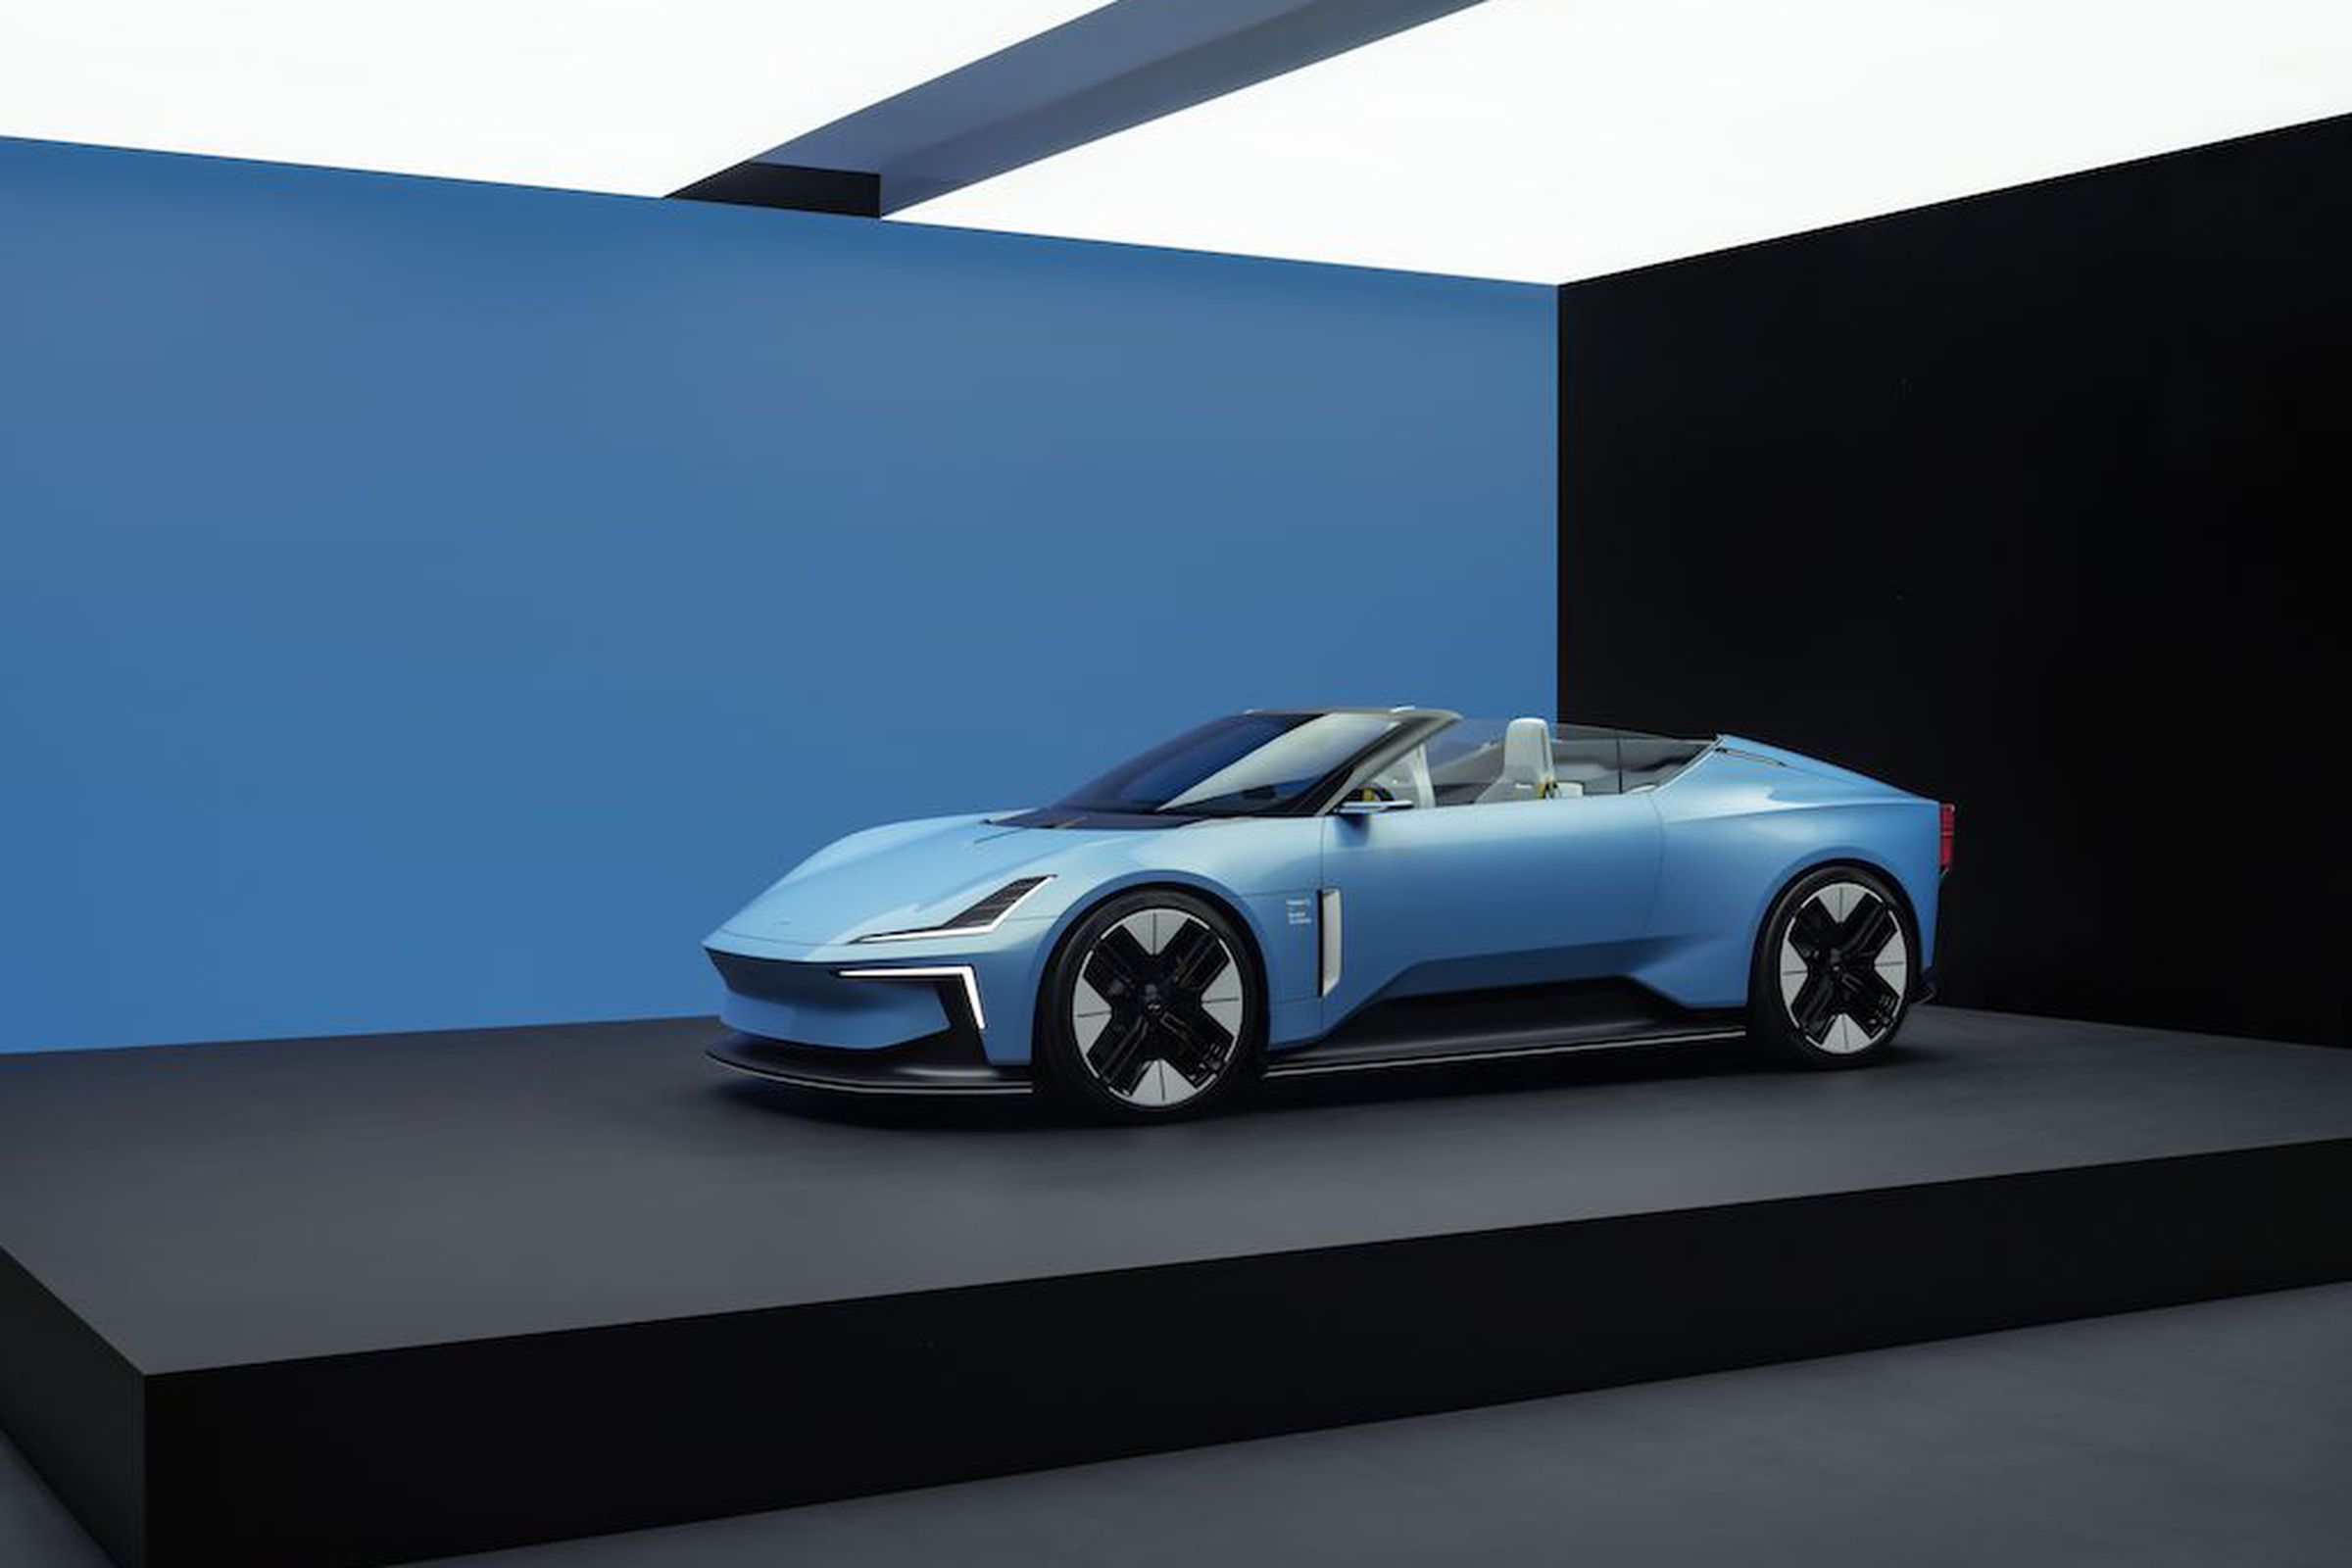 The Polestar 6 is expected to go into production in 2026.